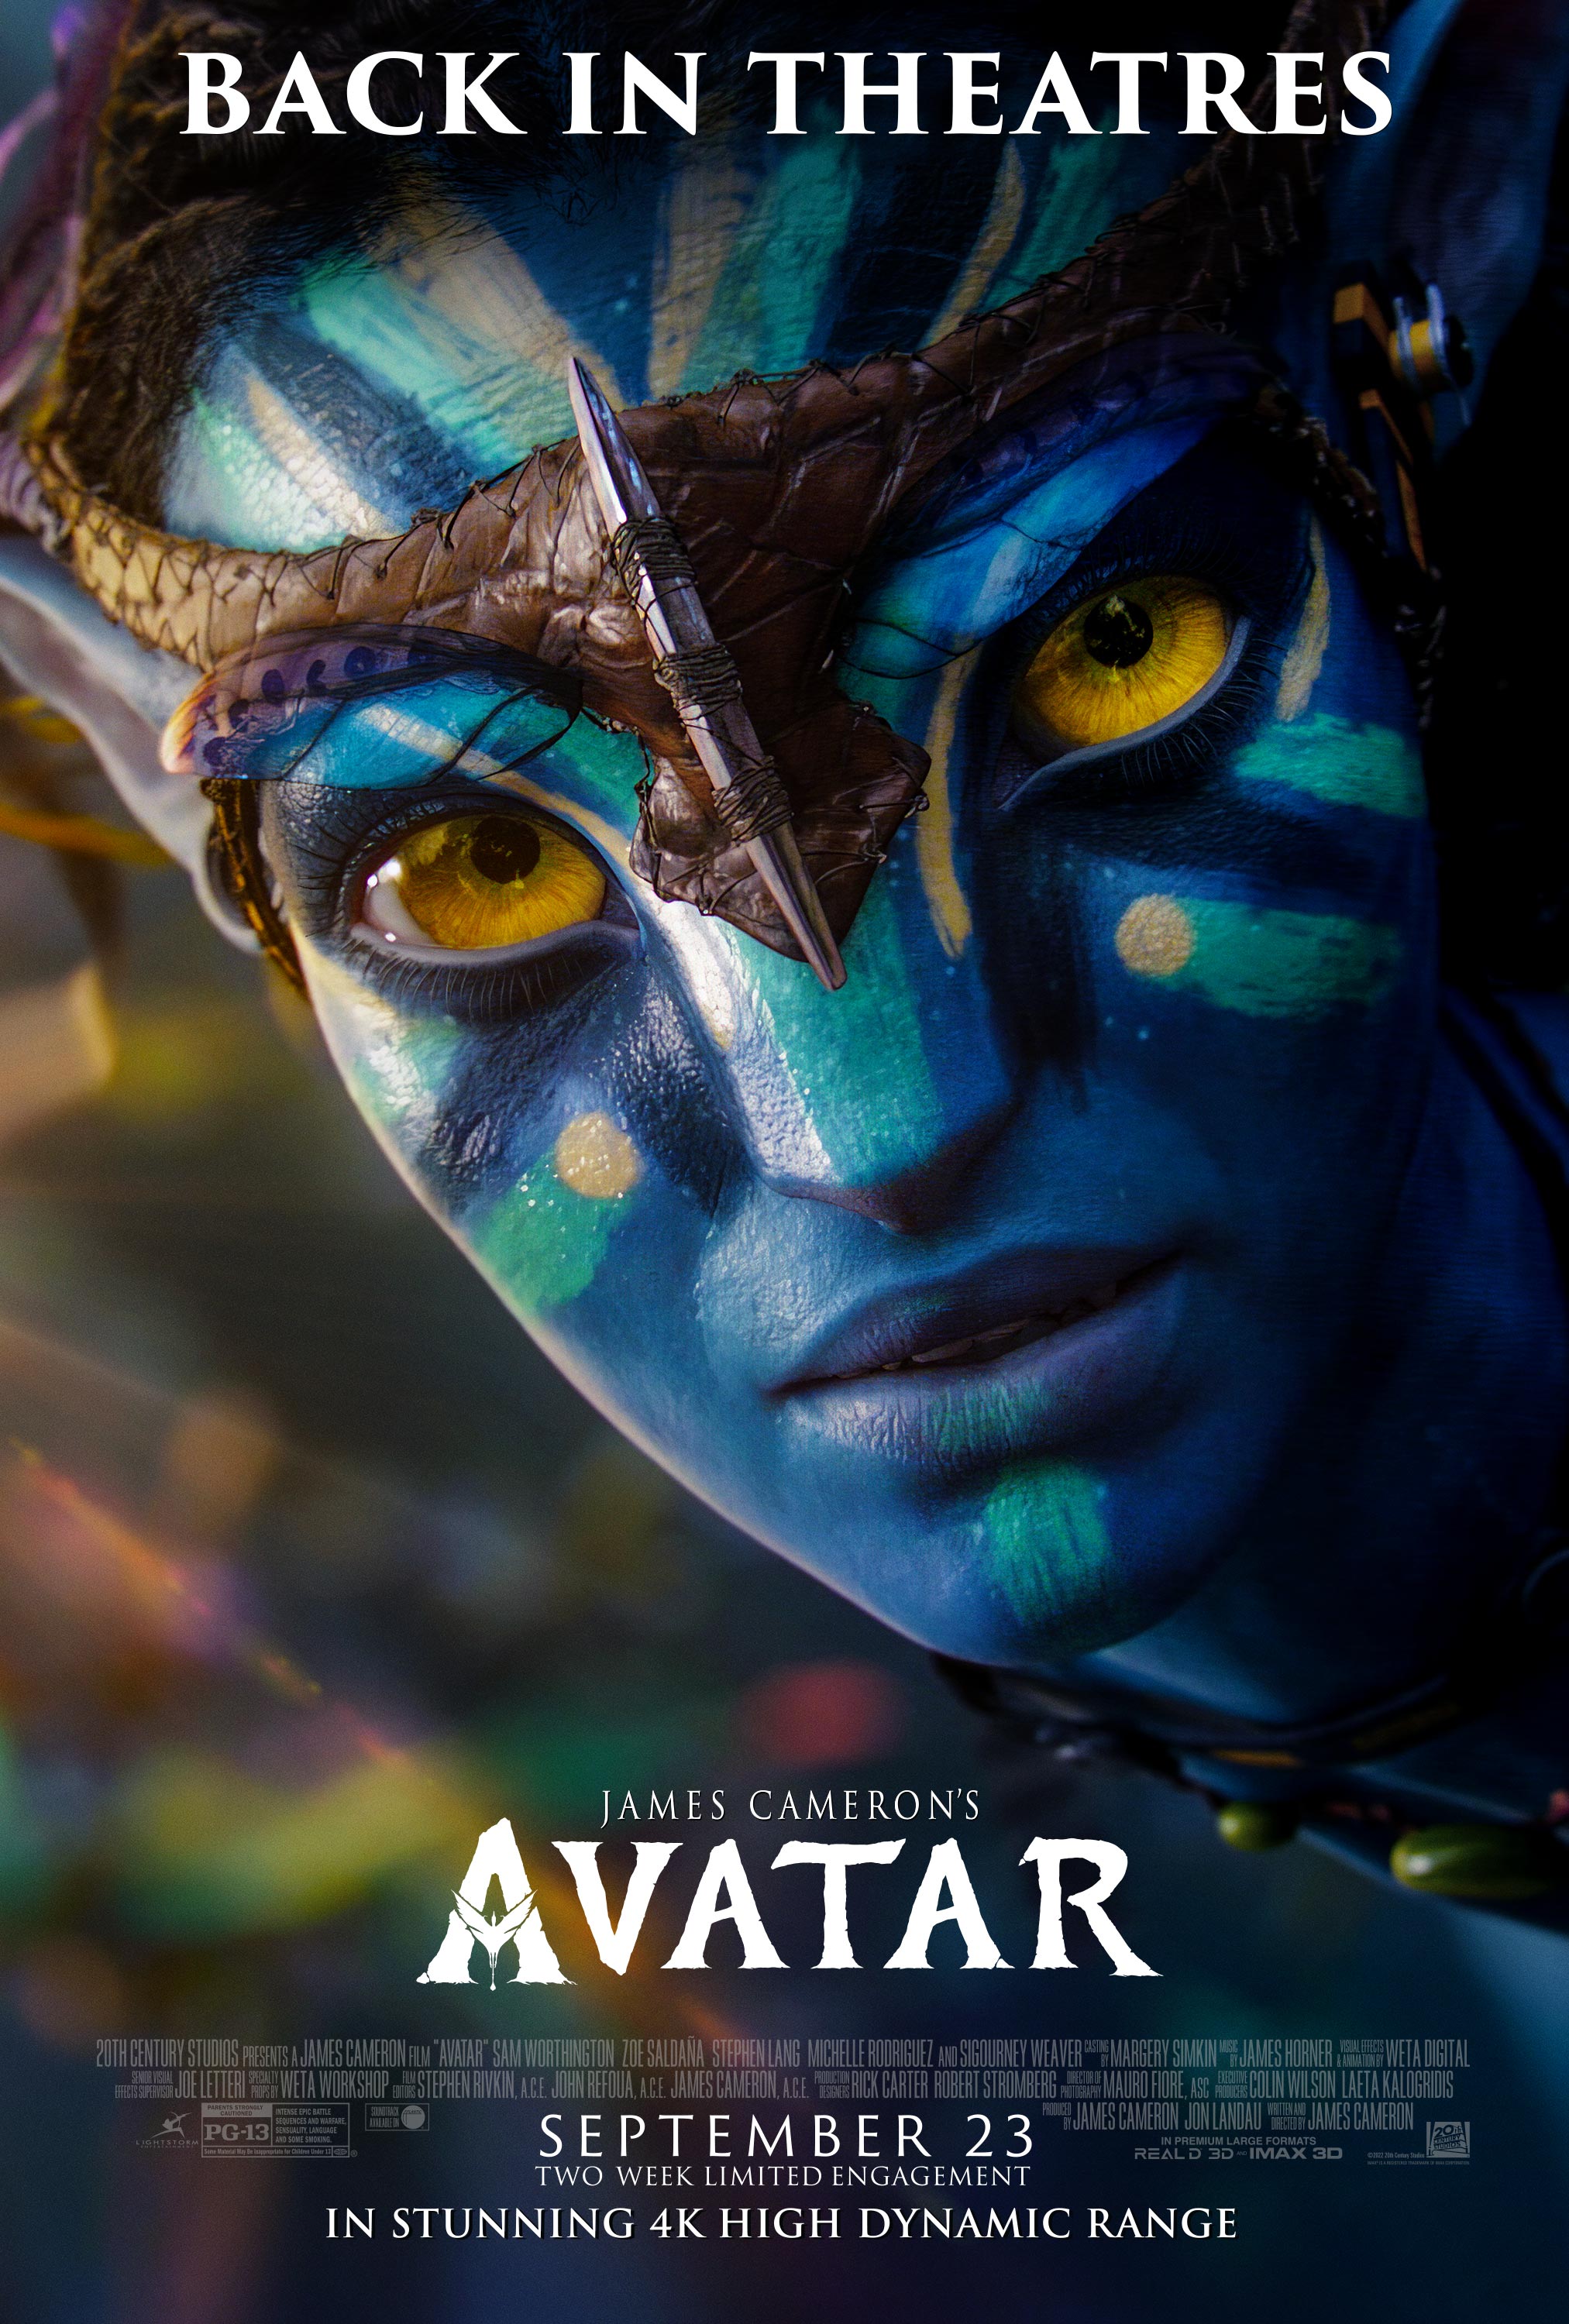 Avatar poster - back in theatres September 23.